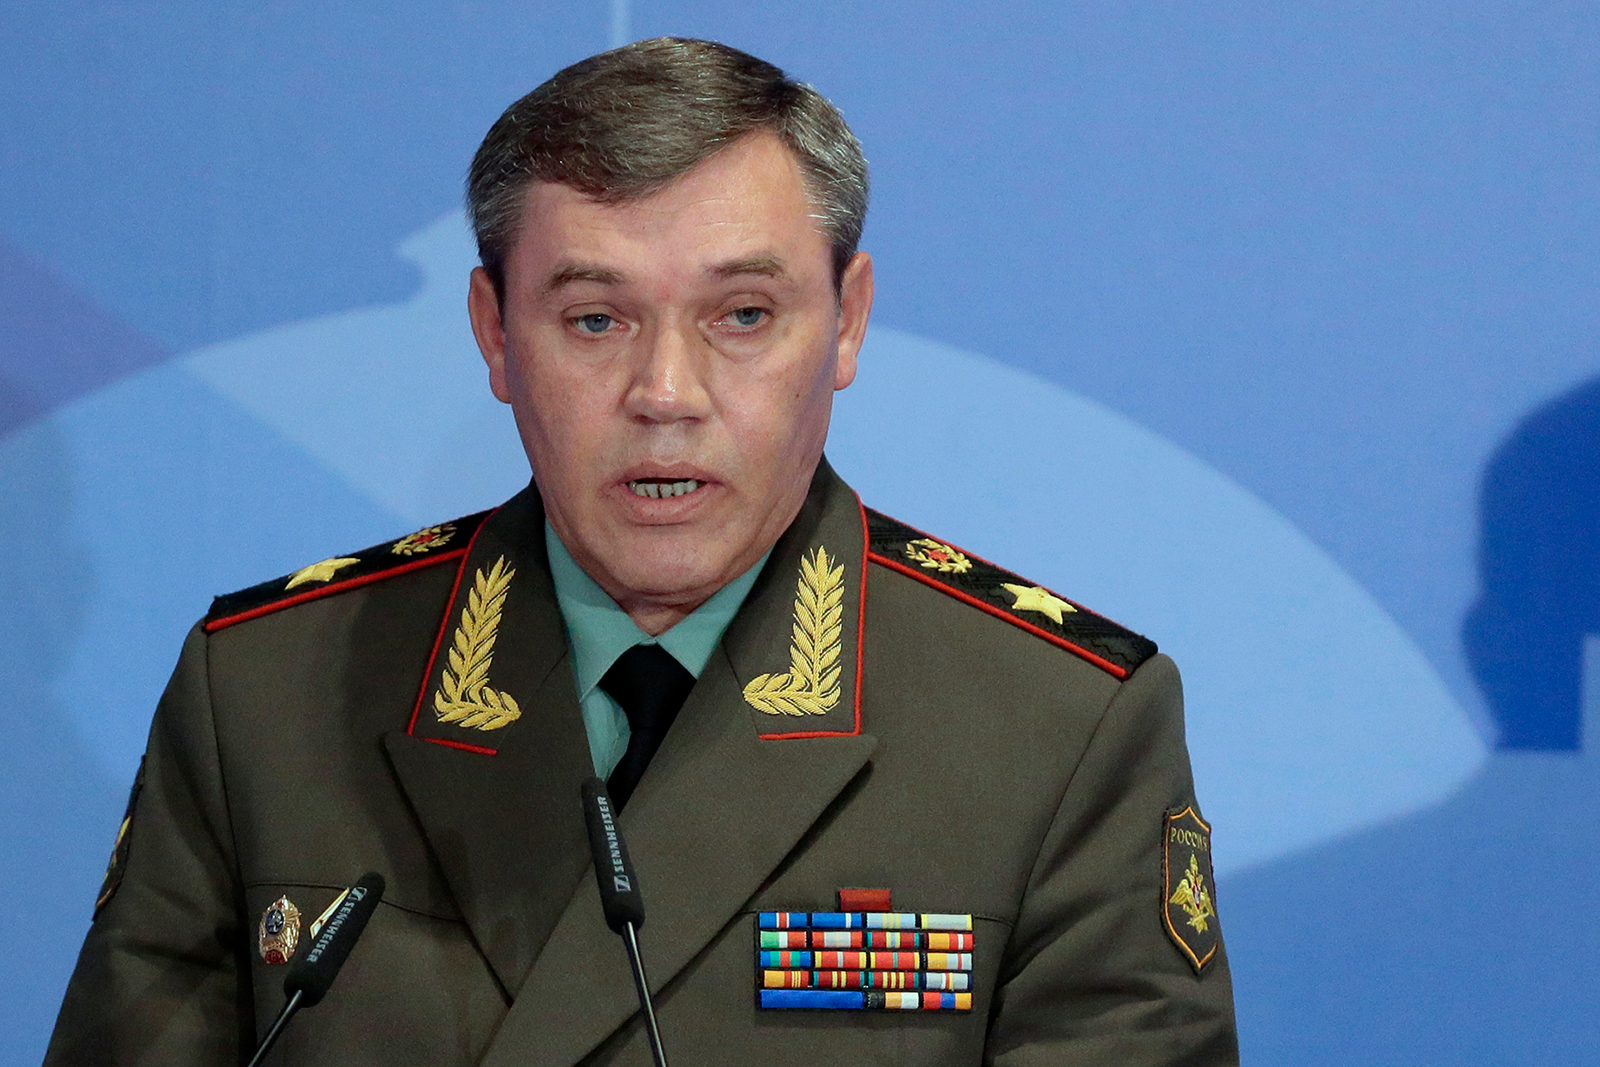 Gen. Valery Gerasimov speaks during a security conference in Moscow on May 23, 2013.